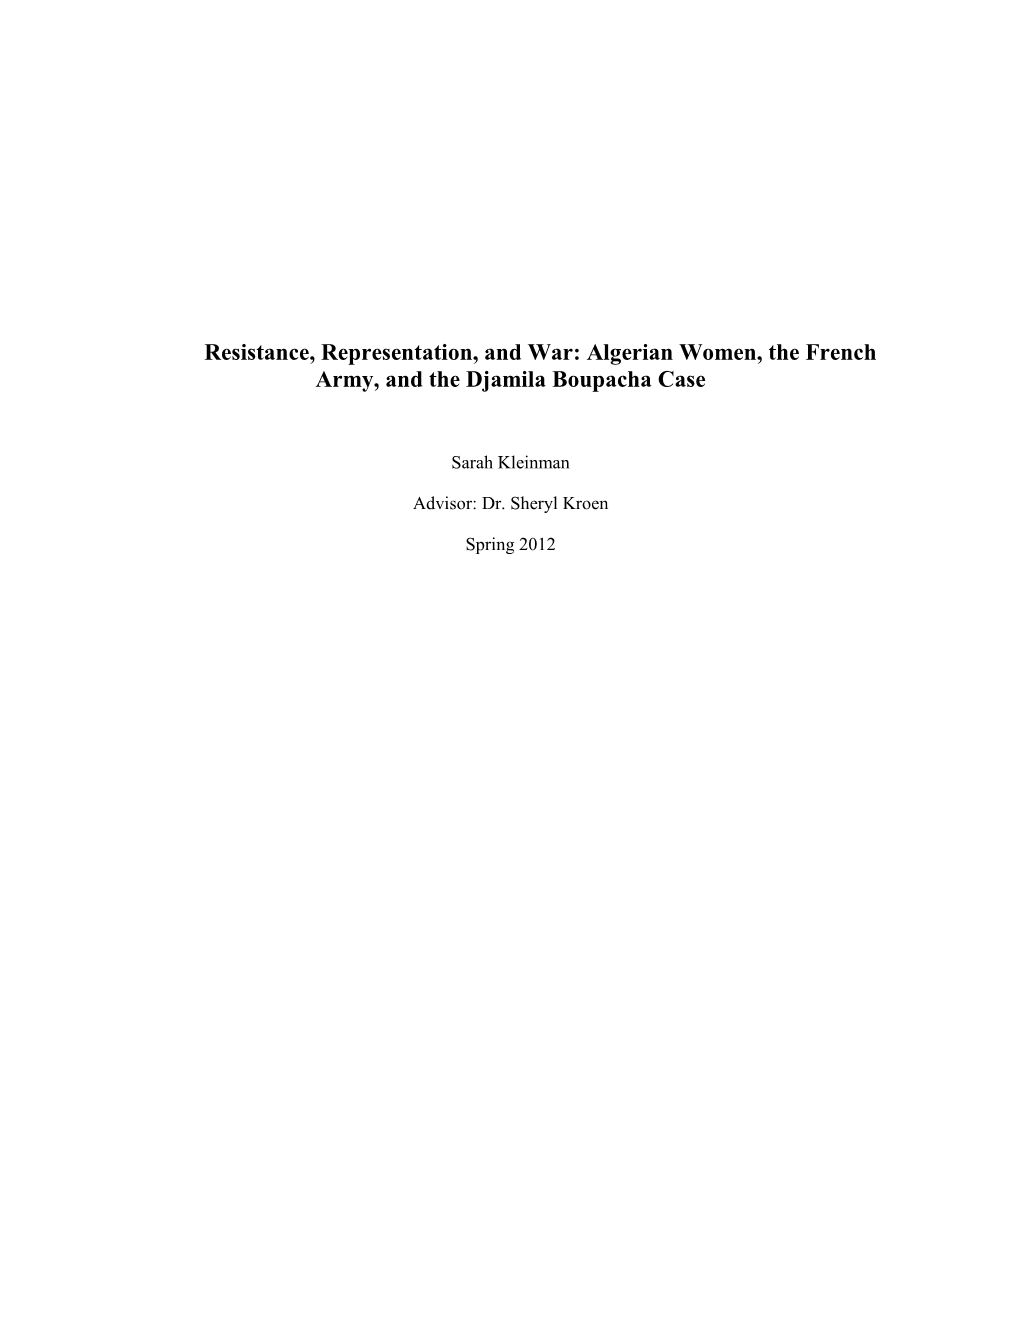 Resistance, Representation, and War: Algerian Women, the French Army, and the Djamila Boupacha Case